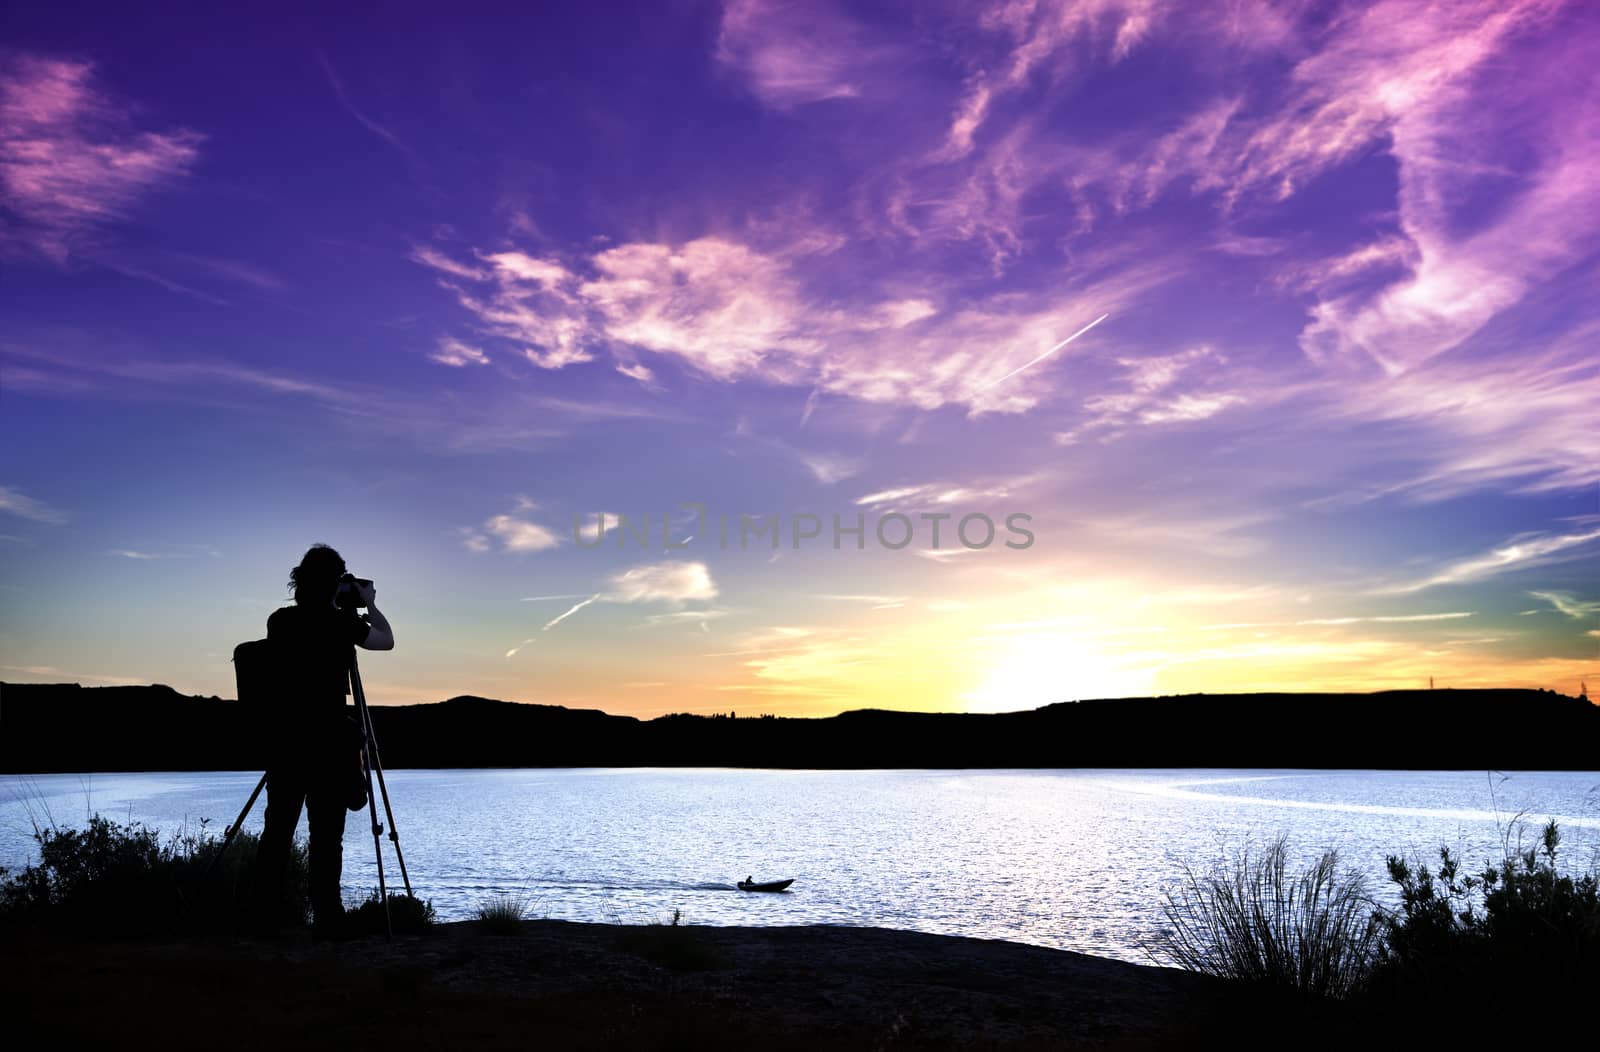 
Photographer in action on a beautiful sunset